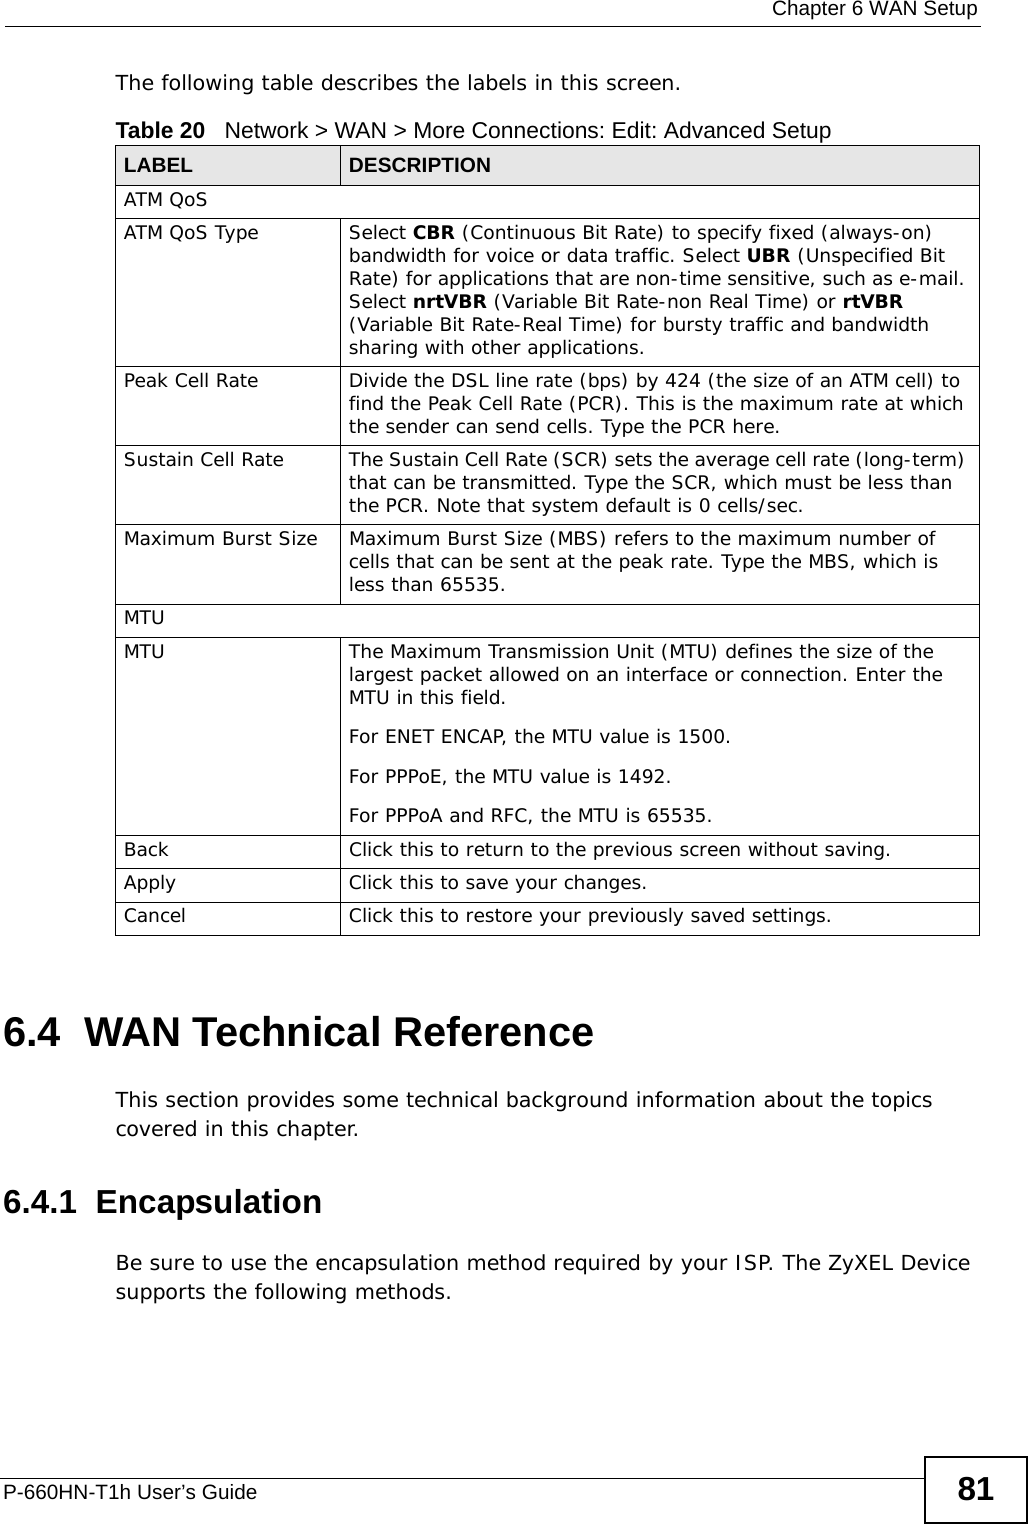  Chapter 6 WAN SetupP-660HN-T1h User’s Guide 81The following table describes the labels in this screen. 6.4  WAN Technical ReferenceThis section provides some technical background information about the topics covered in this chapter.6.4.1  EncapsulationBe sure to use the encapsulation method required by your ISP. The ZyXEL Device supports the following methods.Table 20   Network &gt; WAN &gt; More Connections: Edit: Advanced SetupLABEL DESCRIPTIONATM QoSATM QoS Type Select CBR (Continuous Bit Rate) to specify fixed (always-on) bandwidth for voice or data traffic. Select UBR (Unspecified Bit Rate) for applications that are non-time sensitive, such as e-mail. Select nrtVBR (Variable Bit Rate-non Real Time) or rtVBR (Variable Bit Rate-Real Time) for bursty traffic and bandwidth sharing with other applications. Peak Cell Rate Divide the DSL line rate (bps) by 424 (the size of an ATM cell) to find the Peak Cell Rate (PCR). This is the maximum rate at which the sender can send cells. Type the PCR here.Sustain Cell Rate The Sustain Cell Rate (SCR) sets the average cell rate (long-term) that can be transmitted. Type the SCR, which must be less than the PCR. Note that system default is 0 cells/sec. Maximum Burst Size Maximum Burst Size (MBS) refers to the maximum number of cells that can be sent at the peak rate. Type the MBS, which is less than 65535. MTUMTU The Maximum Transmission Unit (MTU) defines the size of the largest packet allowed on an interface or connection. Enter the MTU in this field.For ENET ENCAP, the MTU value is 1500.For PPPoE, the MTU value is 1492.For PPPoA and RFC, the MTU is 65535.Back Click this to return to the previous screen without saving.Apply Click this to save your changes. Cancel Click this to restore your previously saved settings.